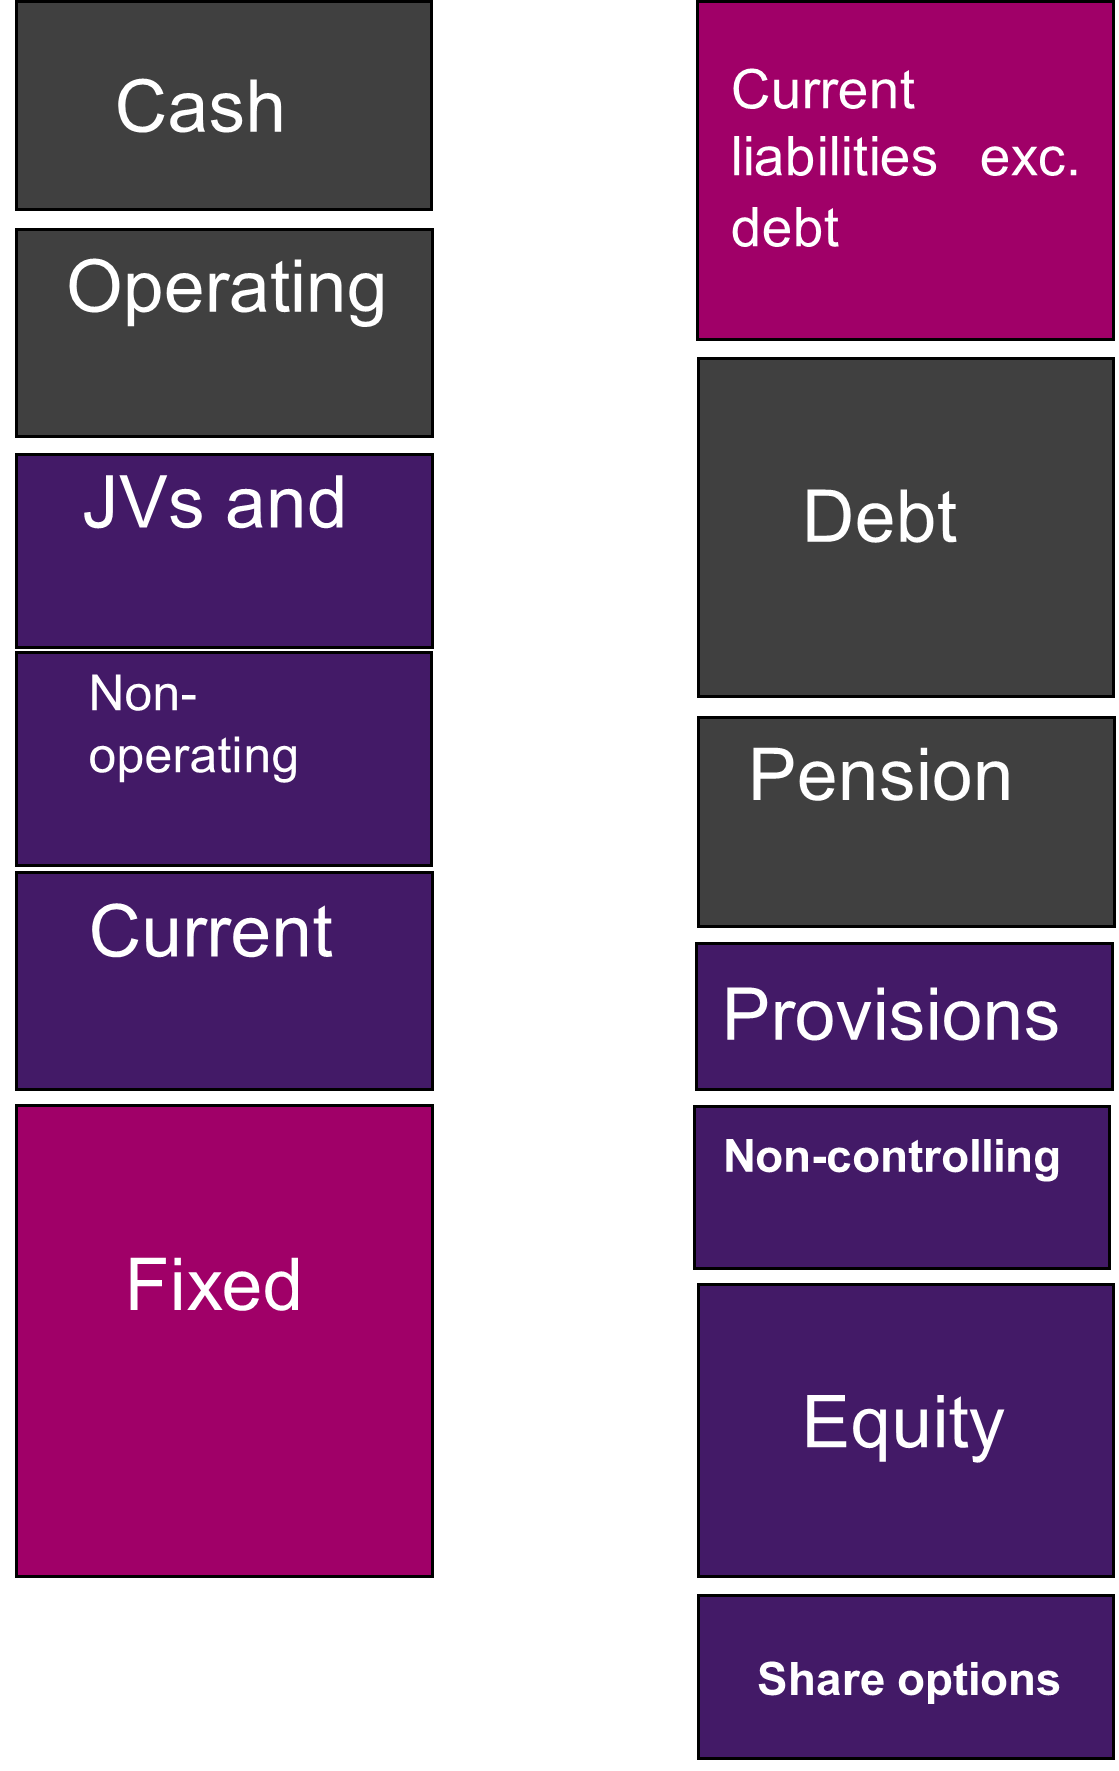 Example of items on the balance sheet of a conglomerate or corporate